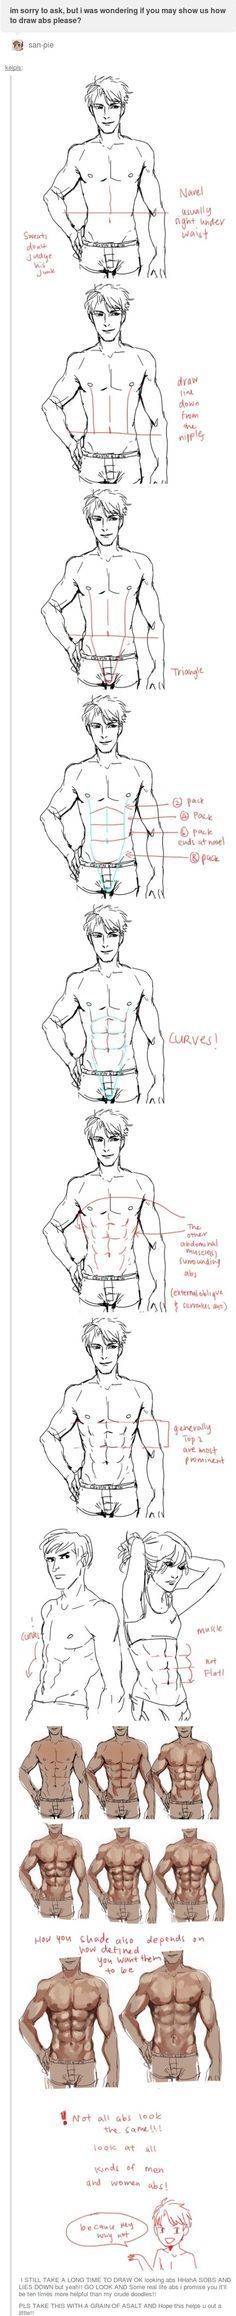 how to draw abs. kelpls.tumblr.com… I have needed this for so looooong